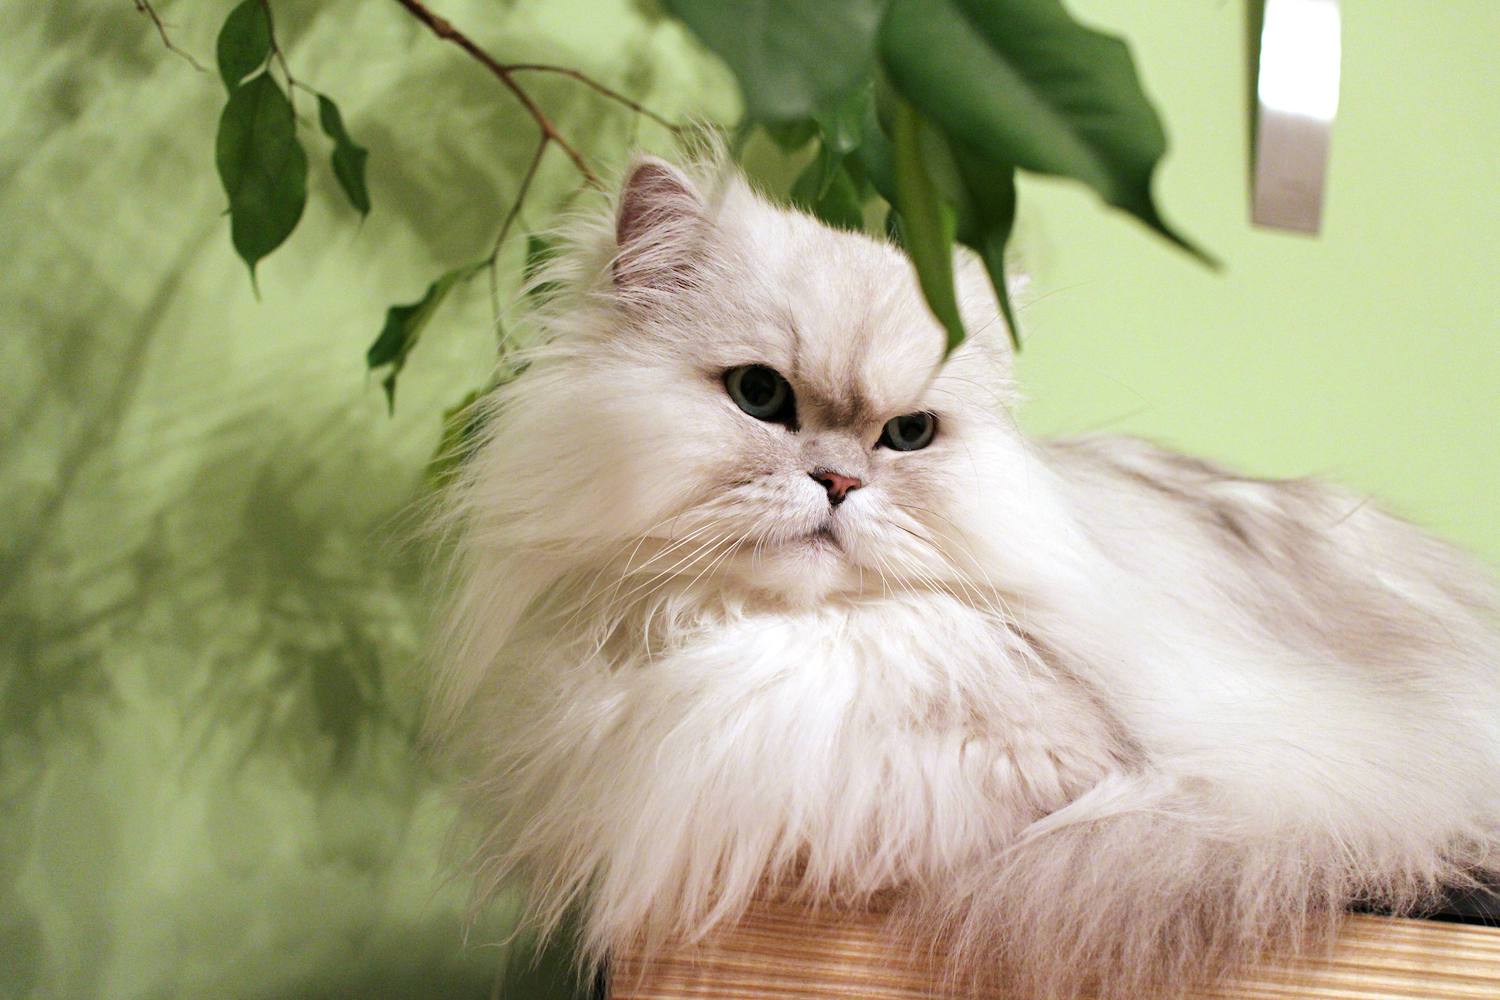 Persian cat lounging inside by a plant